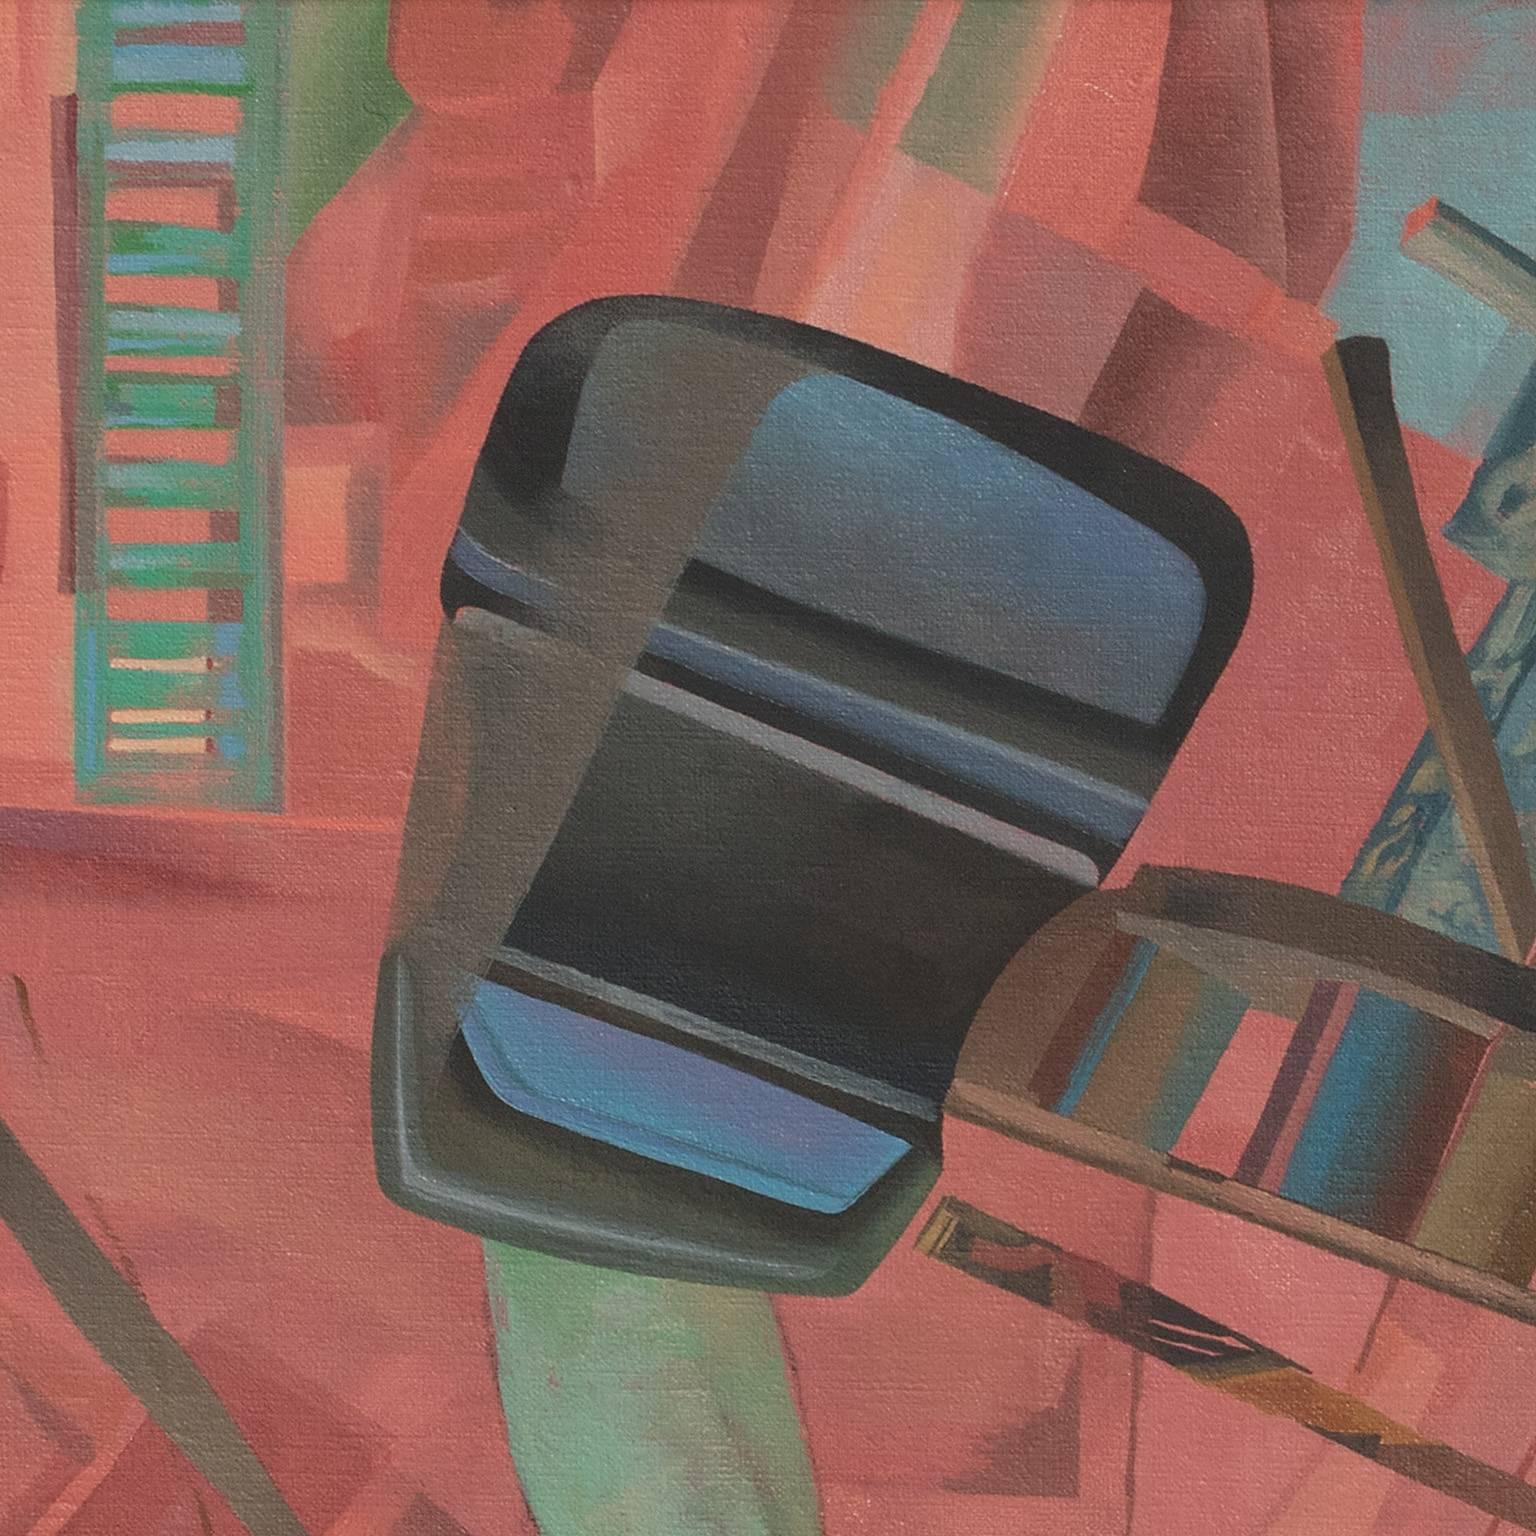 This painting by Bernard Aptekar is part of a series of fourteen aerial cityscapes that the artist created.  As art historian and writer Suzanne Ramljak wrote 